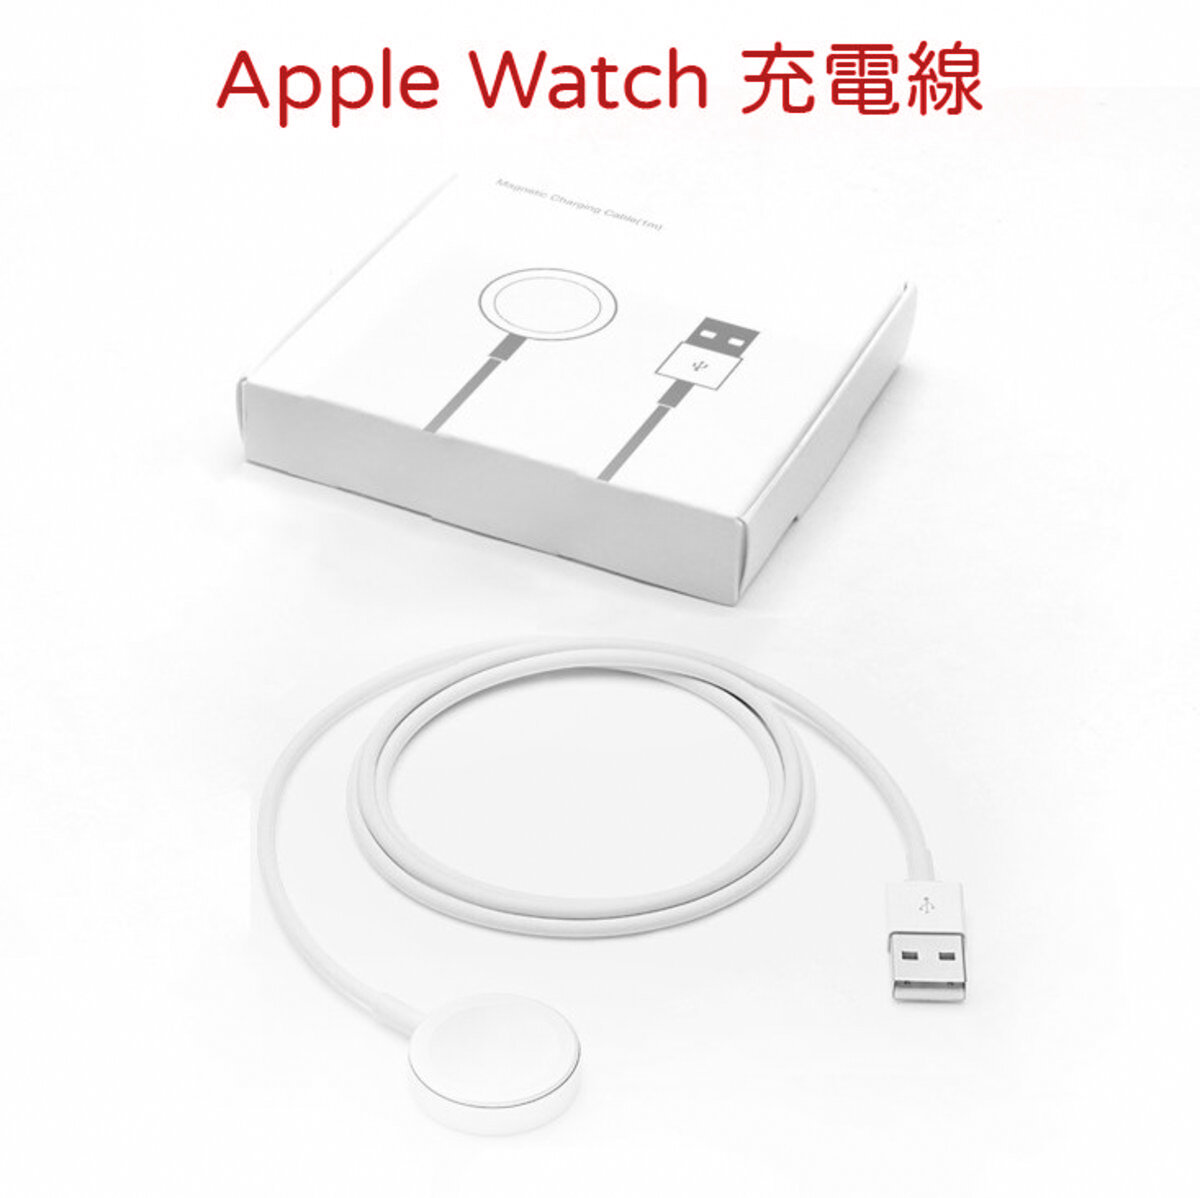 JP | Apple Watch Charging Cable 1M iwatch USB | HKTVmall The Largest HK  Shopping Platform